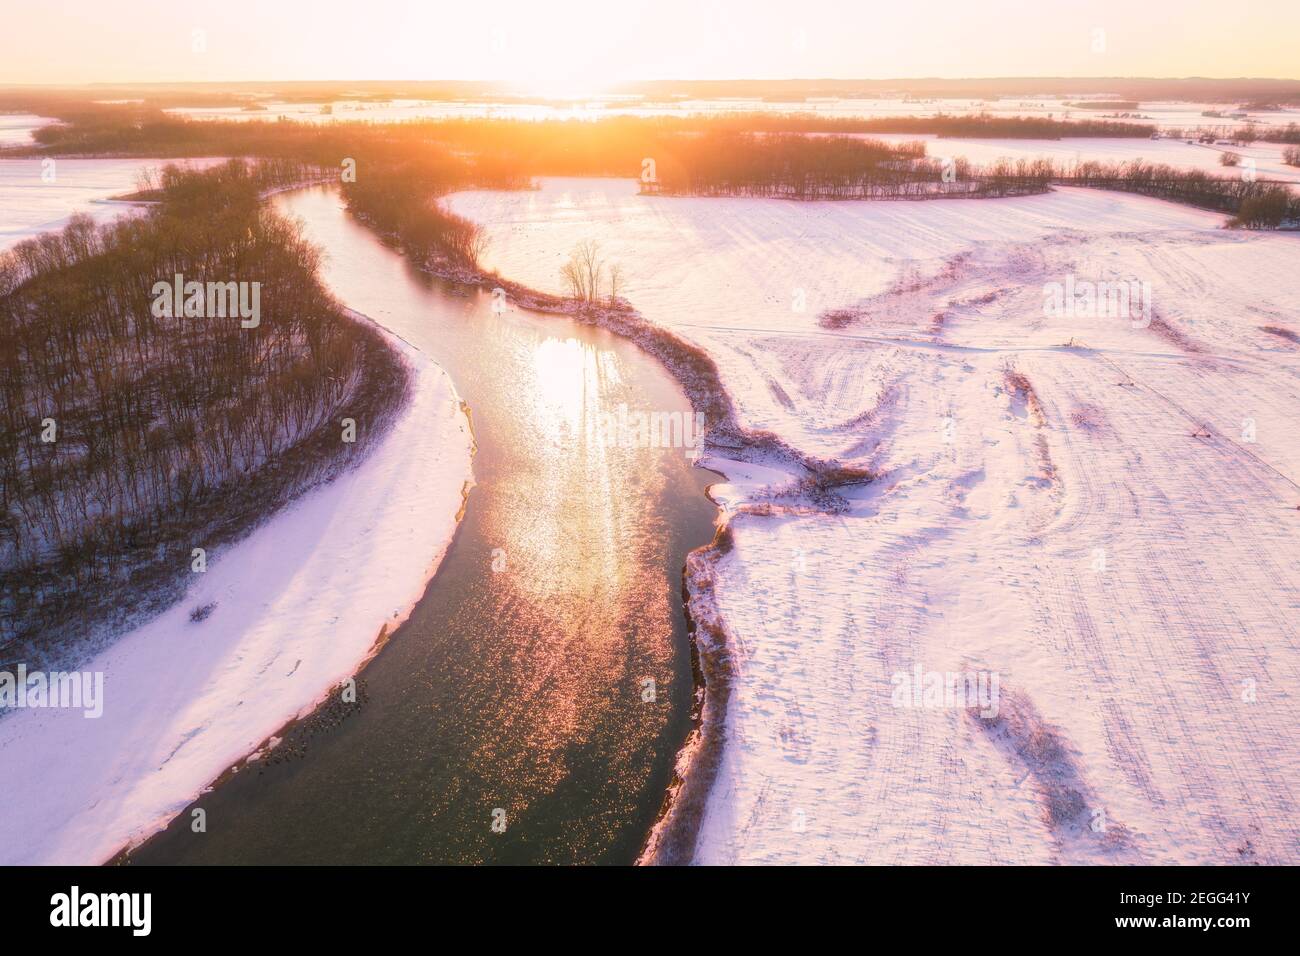 A sunset scene over the white river in Jackson County, IN.  The snow has a magenta hue and several flocks of sandhill cranes are on the river and air. Stock Photo